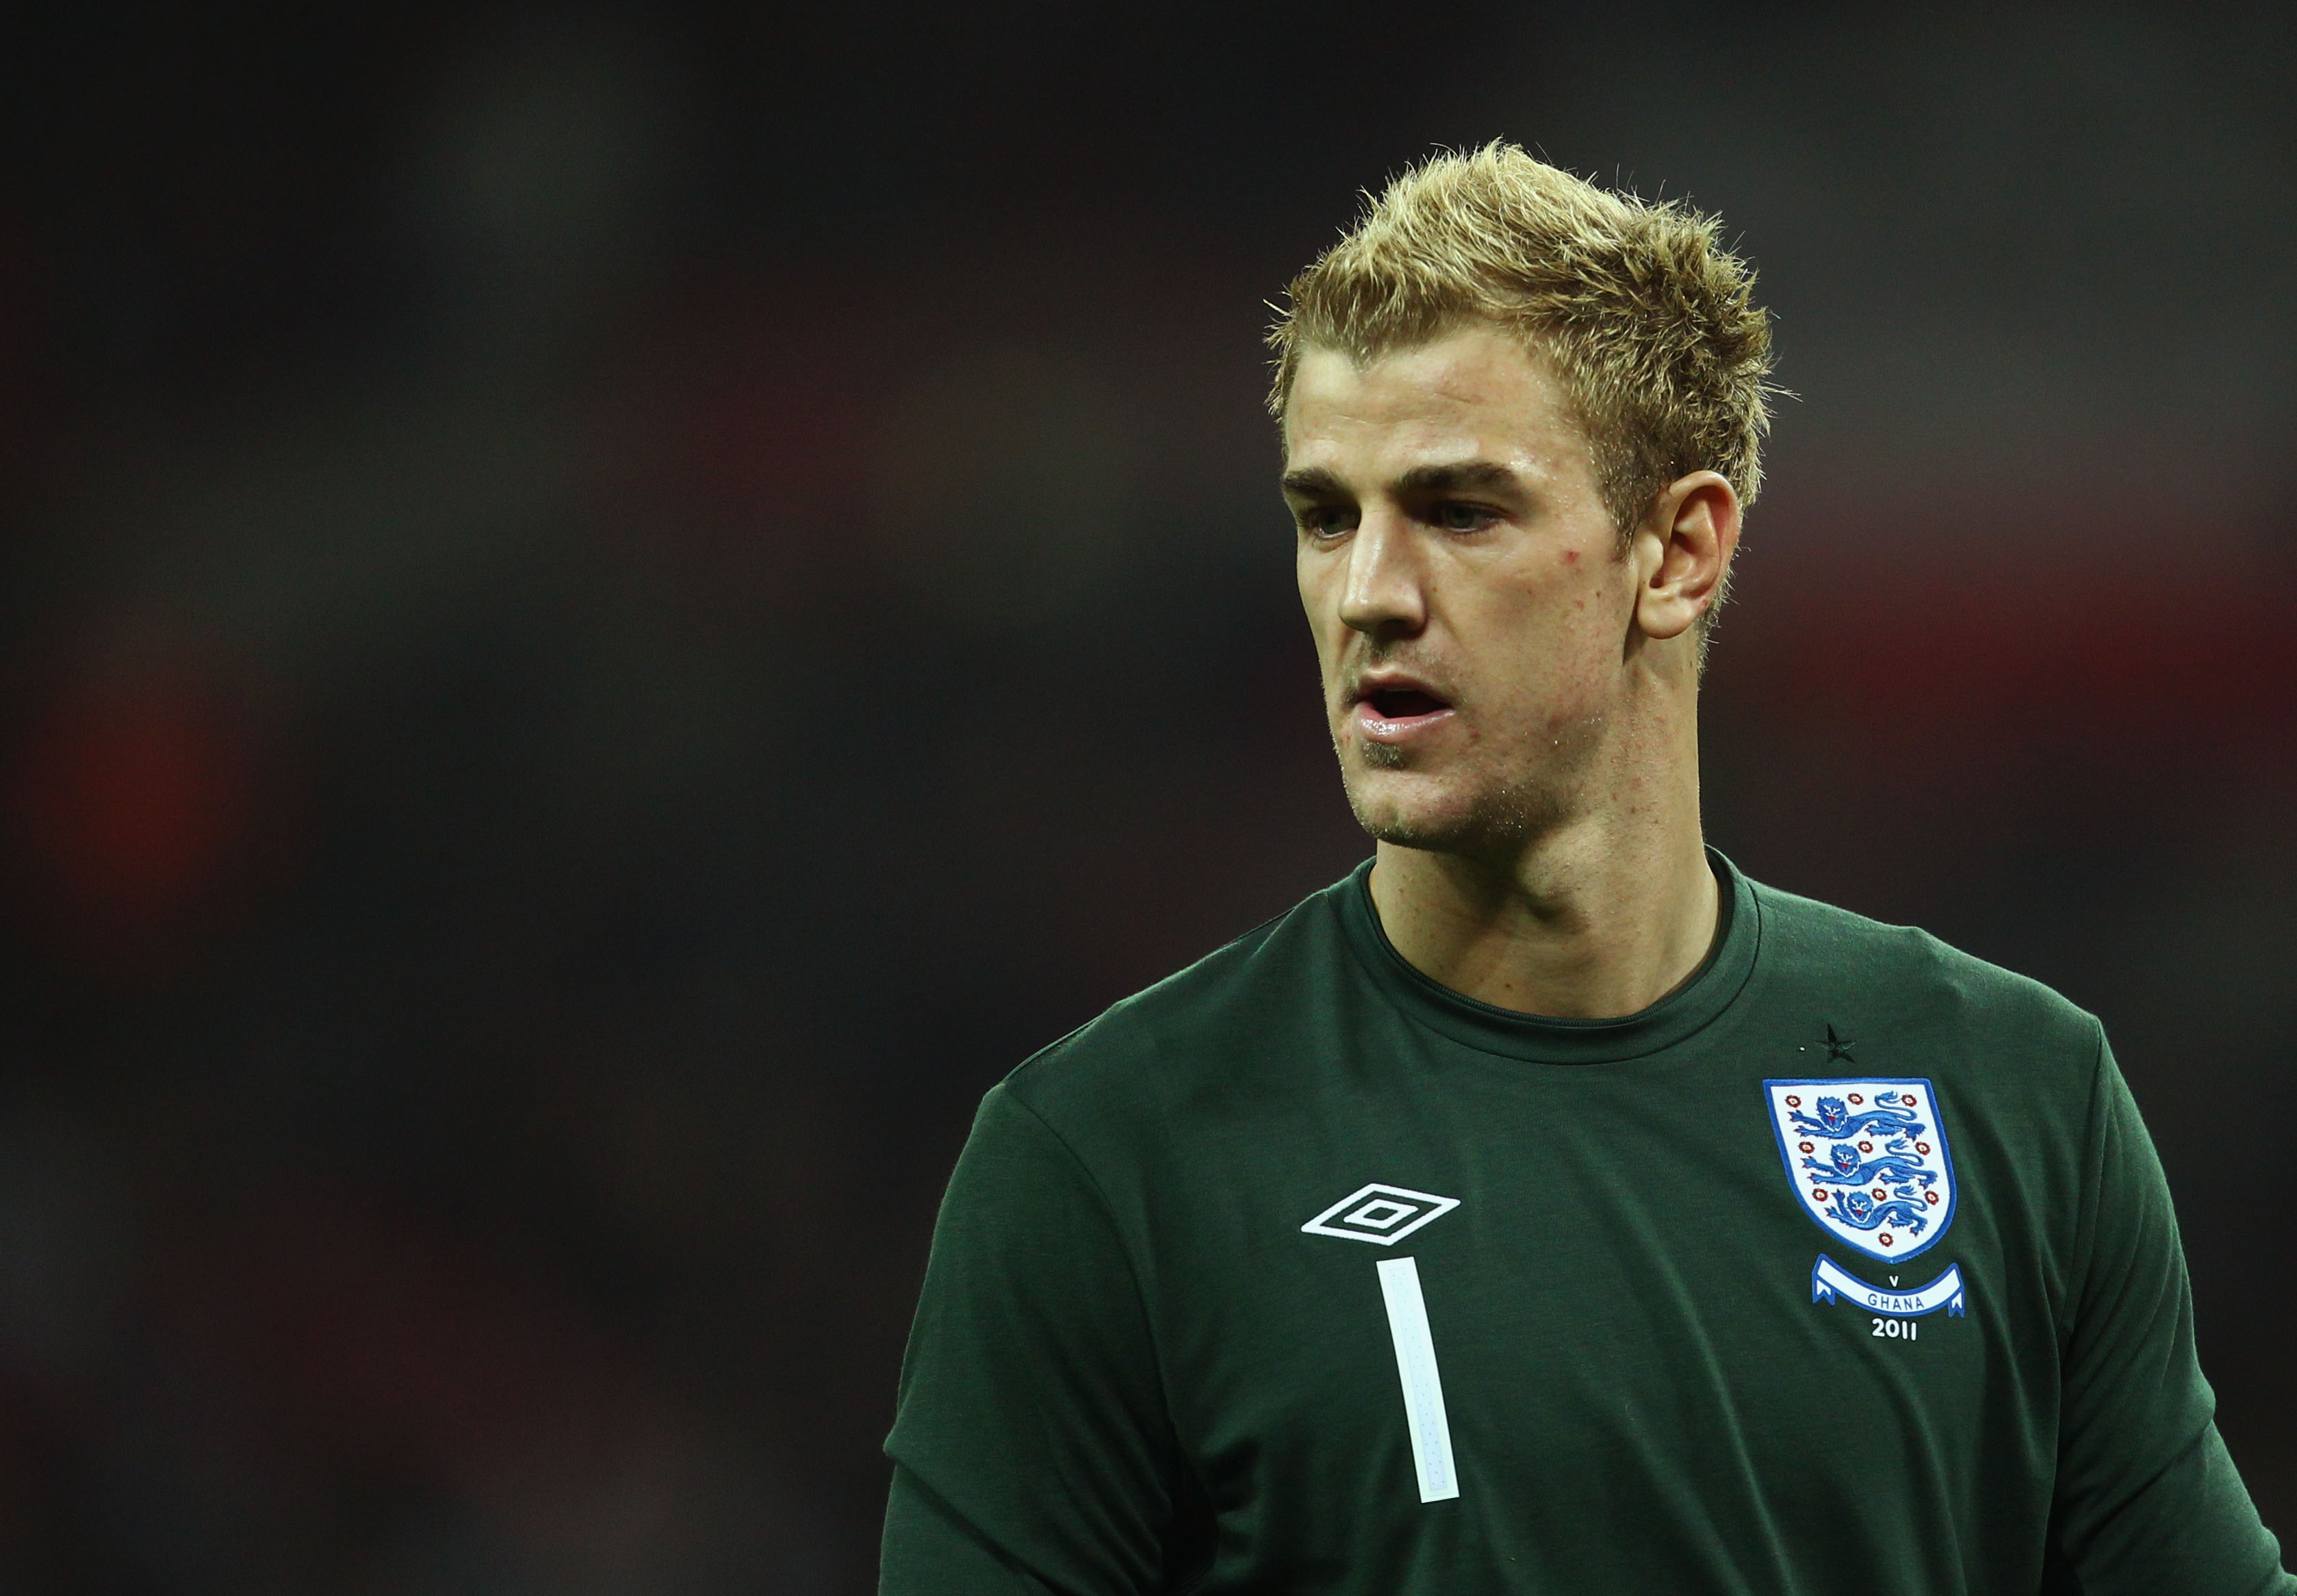 LONDON, ENGLAND - MARCH 29:  Joe Hart of England shows his dejection after conceding a goal  during the international friendly match between England and Ghana at Wembley Stadium on March 29, 2011 in London, England.  (Photo by Julian Finney/Getty Images)